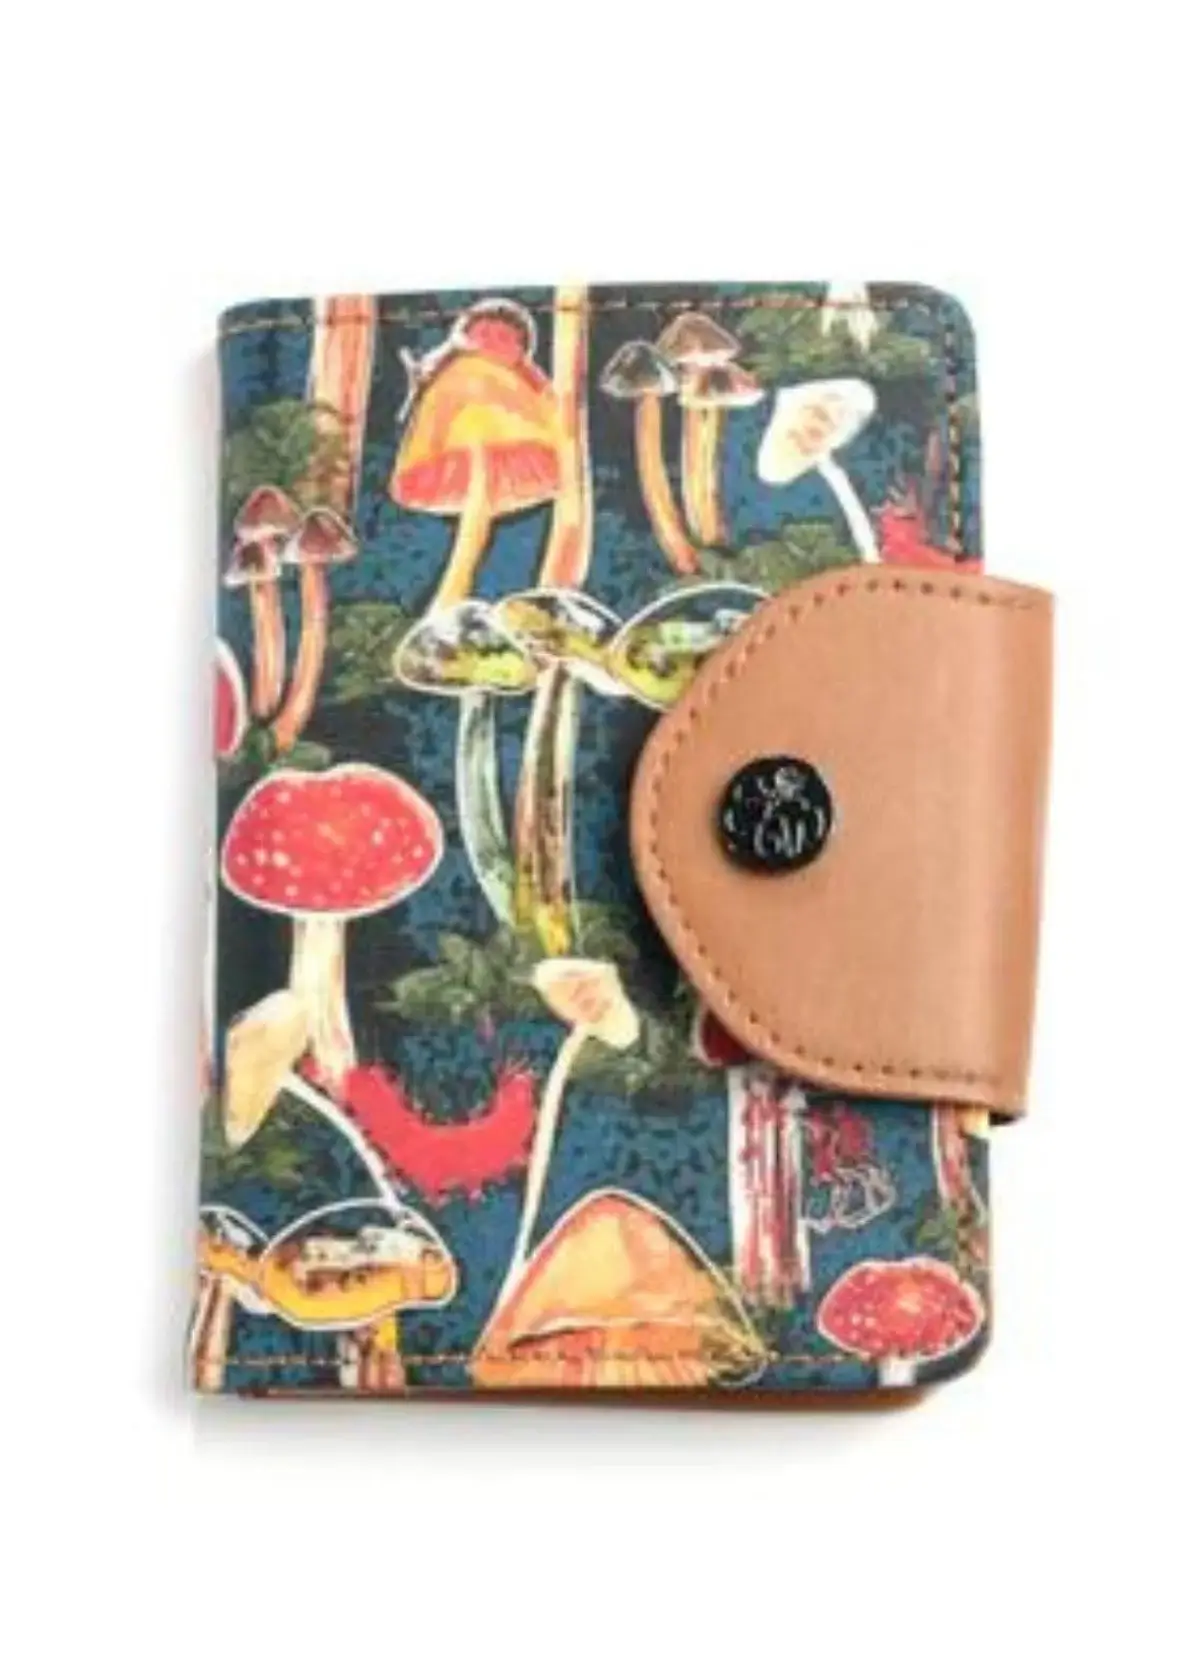 What makes Mushroom Wallets unique from other wallets on the market?